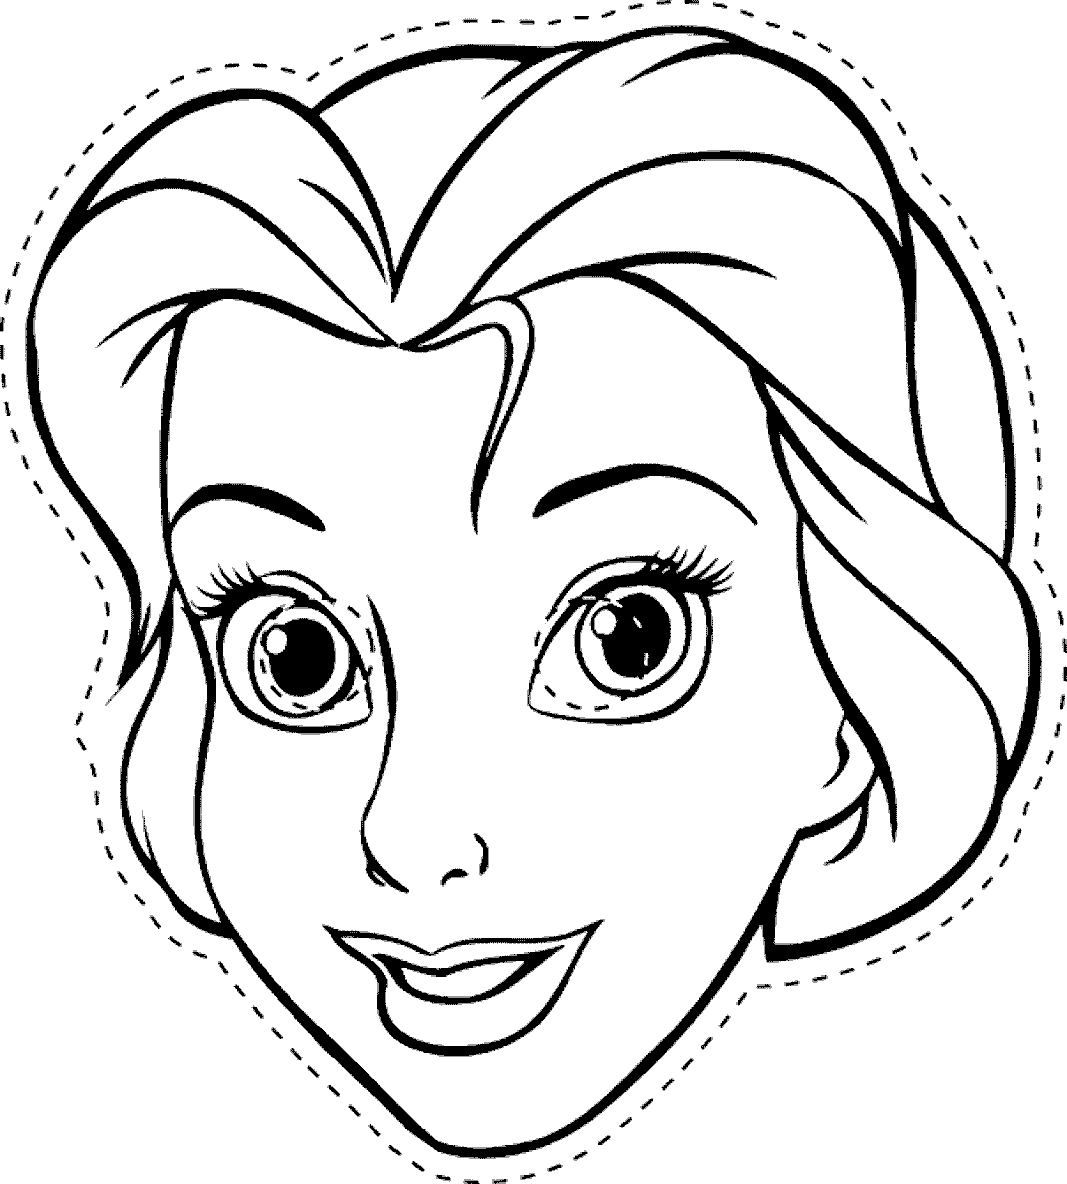 Related Mask Coloring Pages item-4055, Mask Coloring Pages Free ...